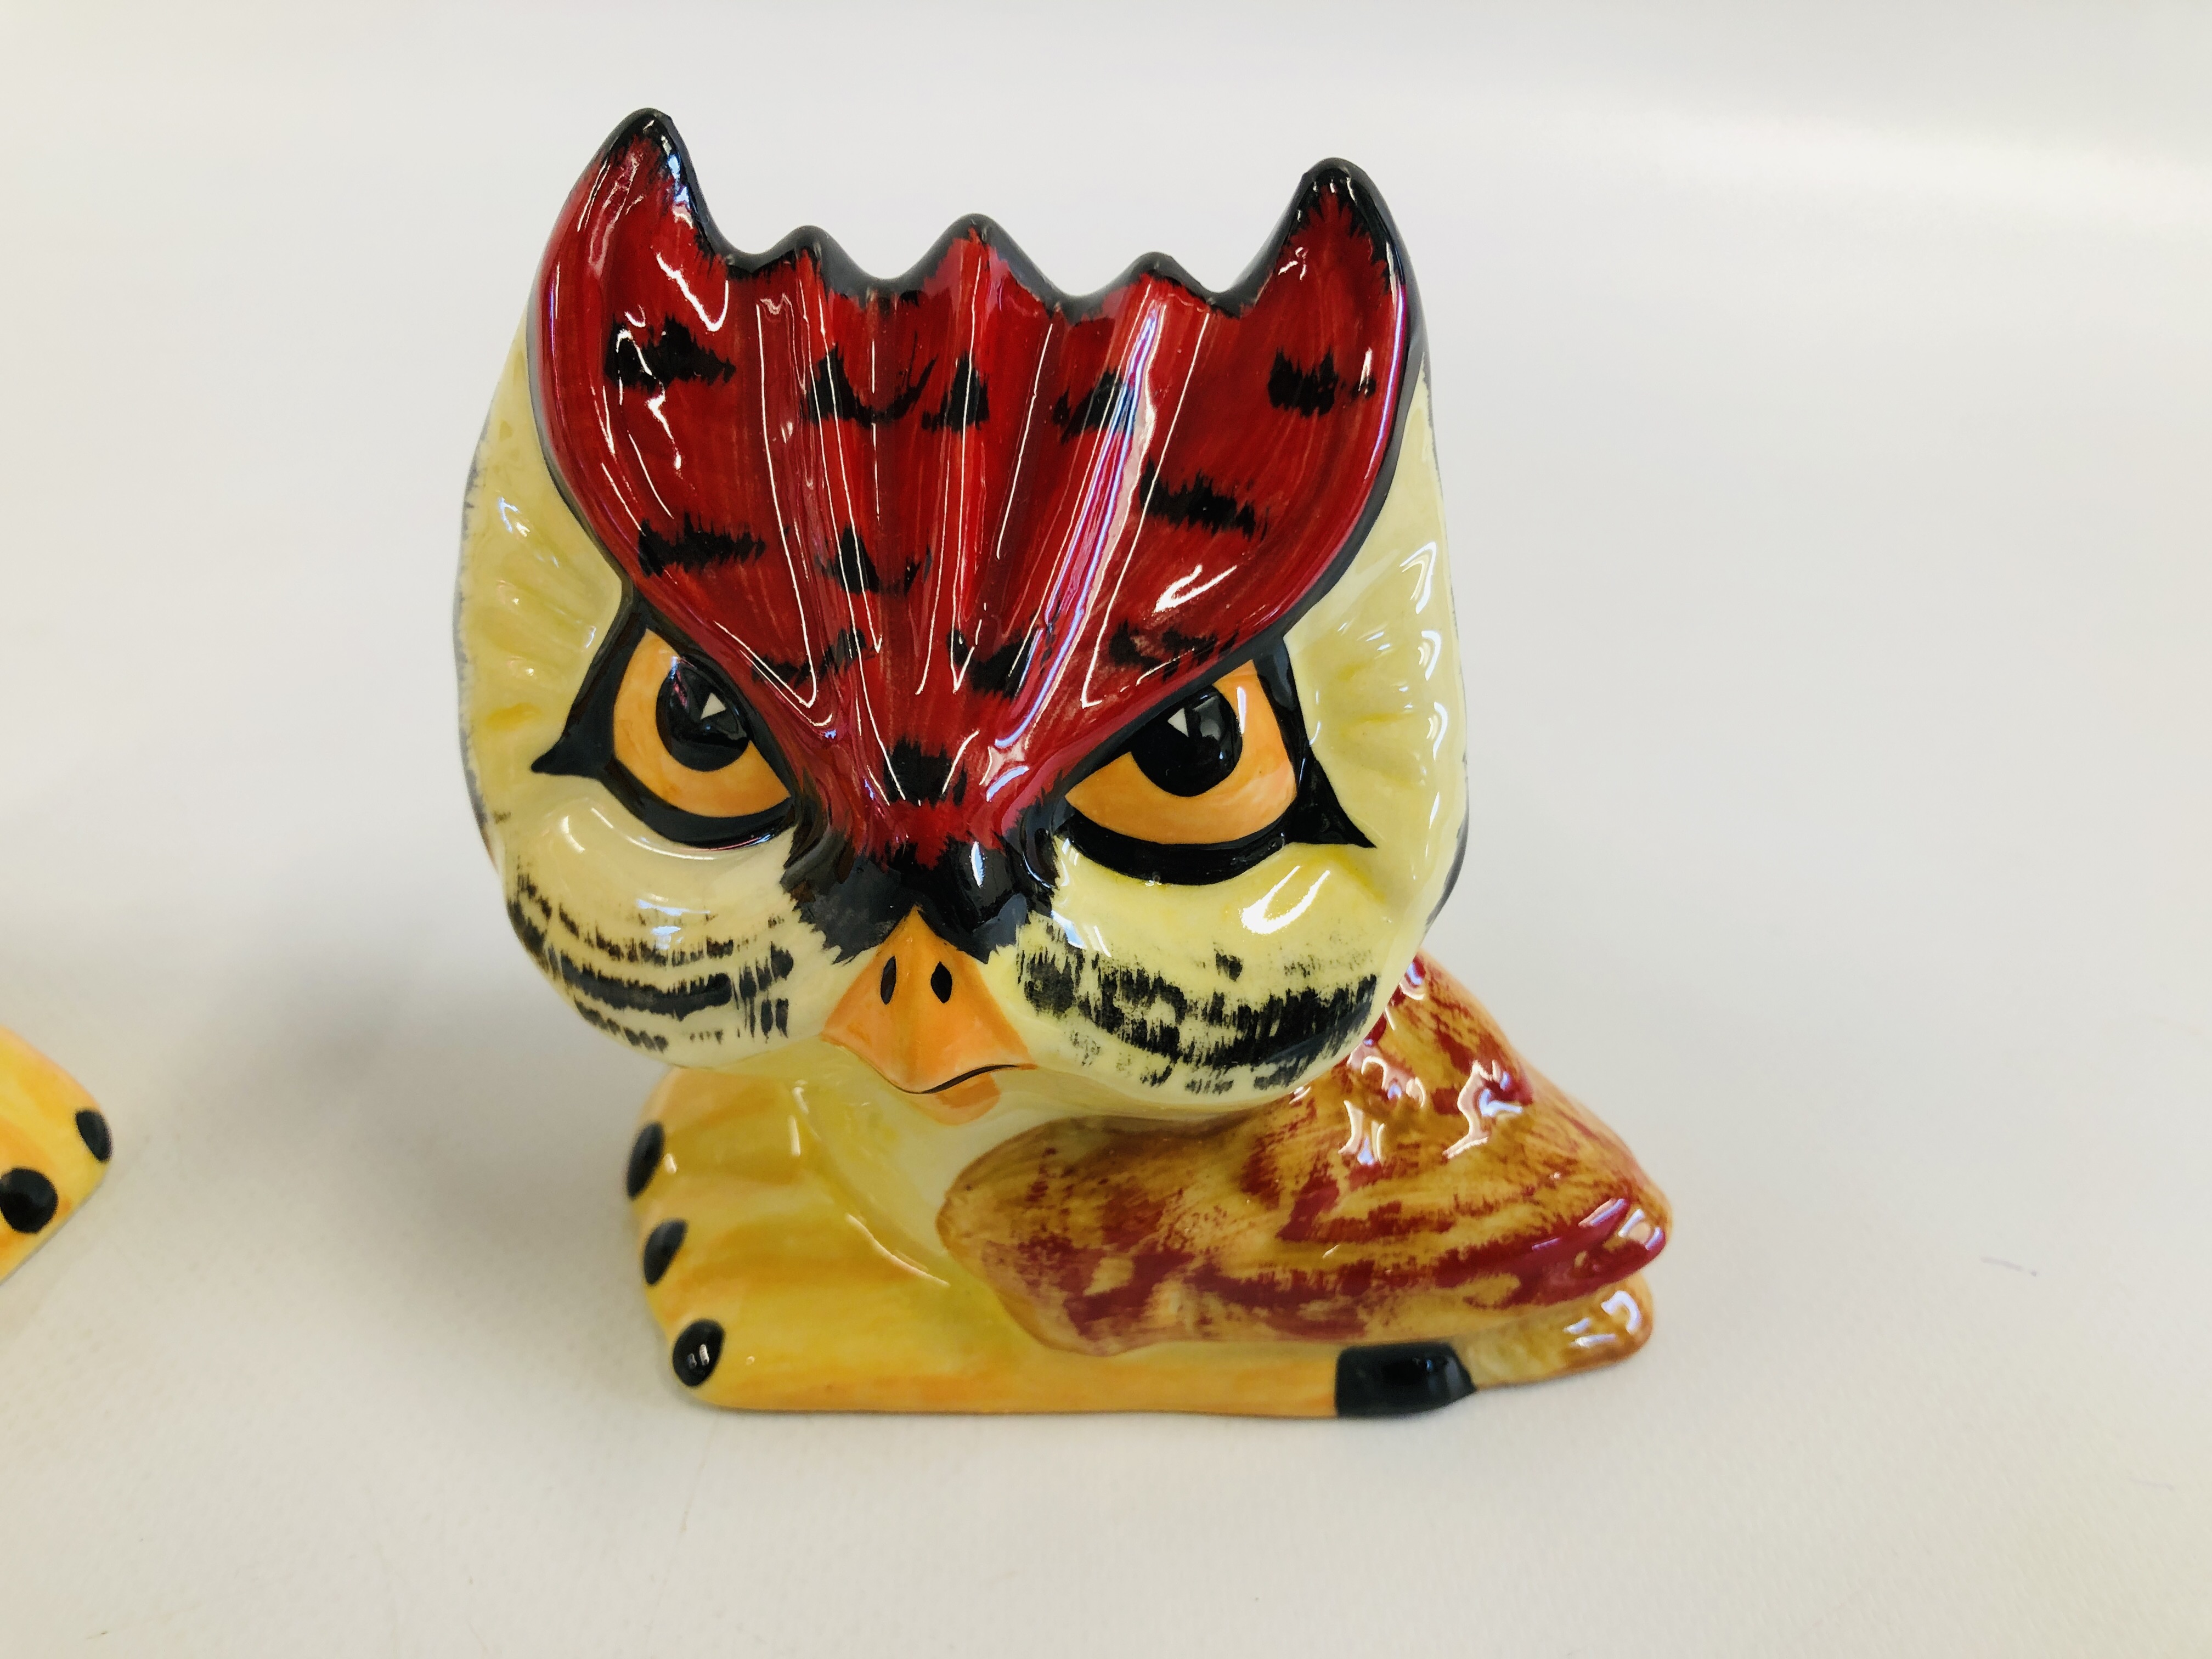 POTTERY "SAM THE EAGLE" H 9CM SIGNED LORNA BAILEY ALONG WITH POTTERY "WISE OWL" SIGNED LORNA BAILEY - Image 2 of 7